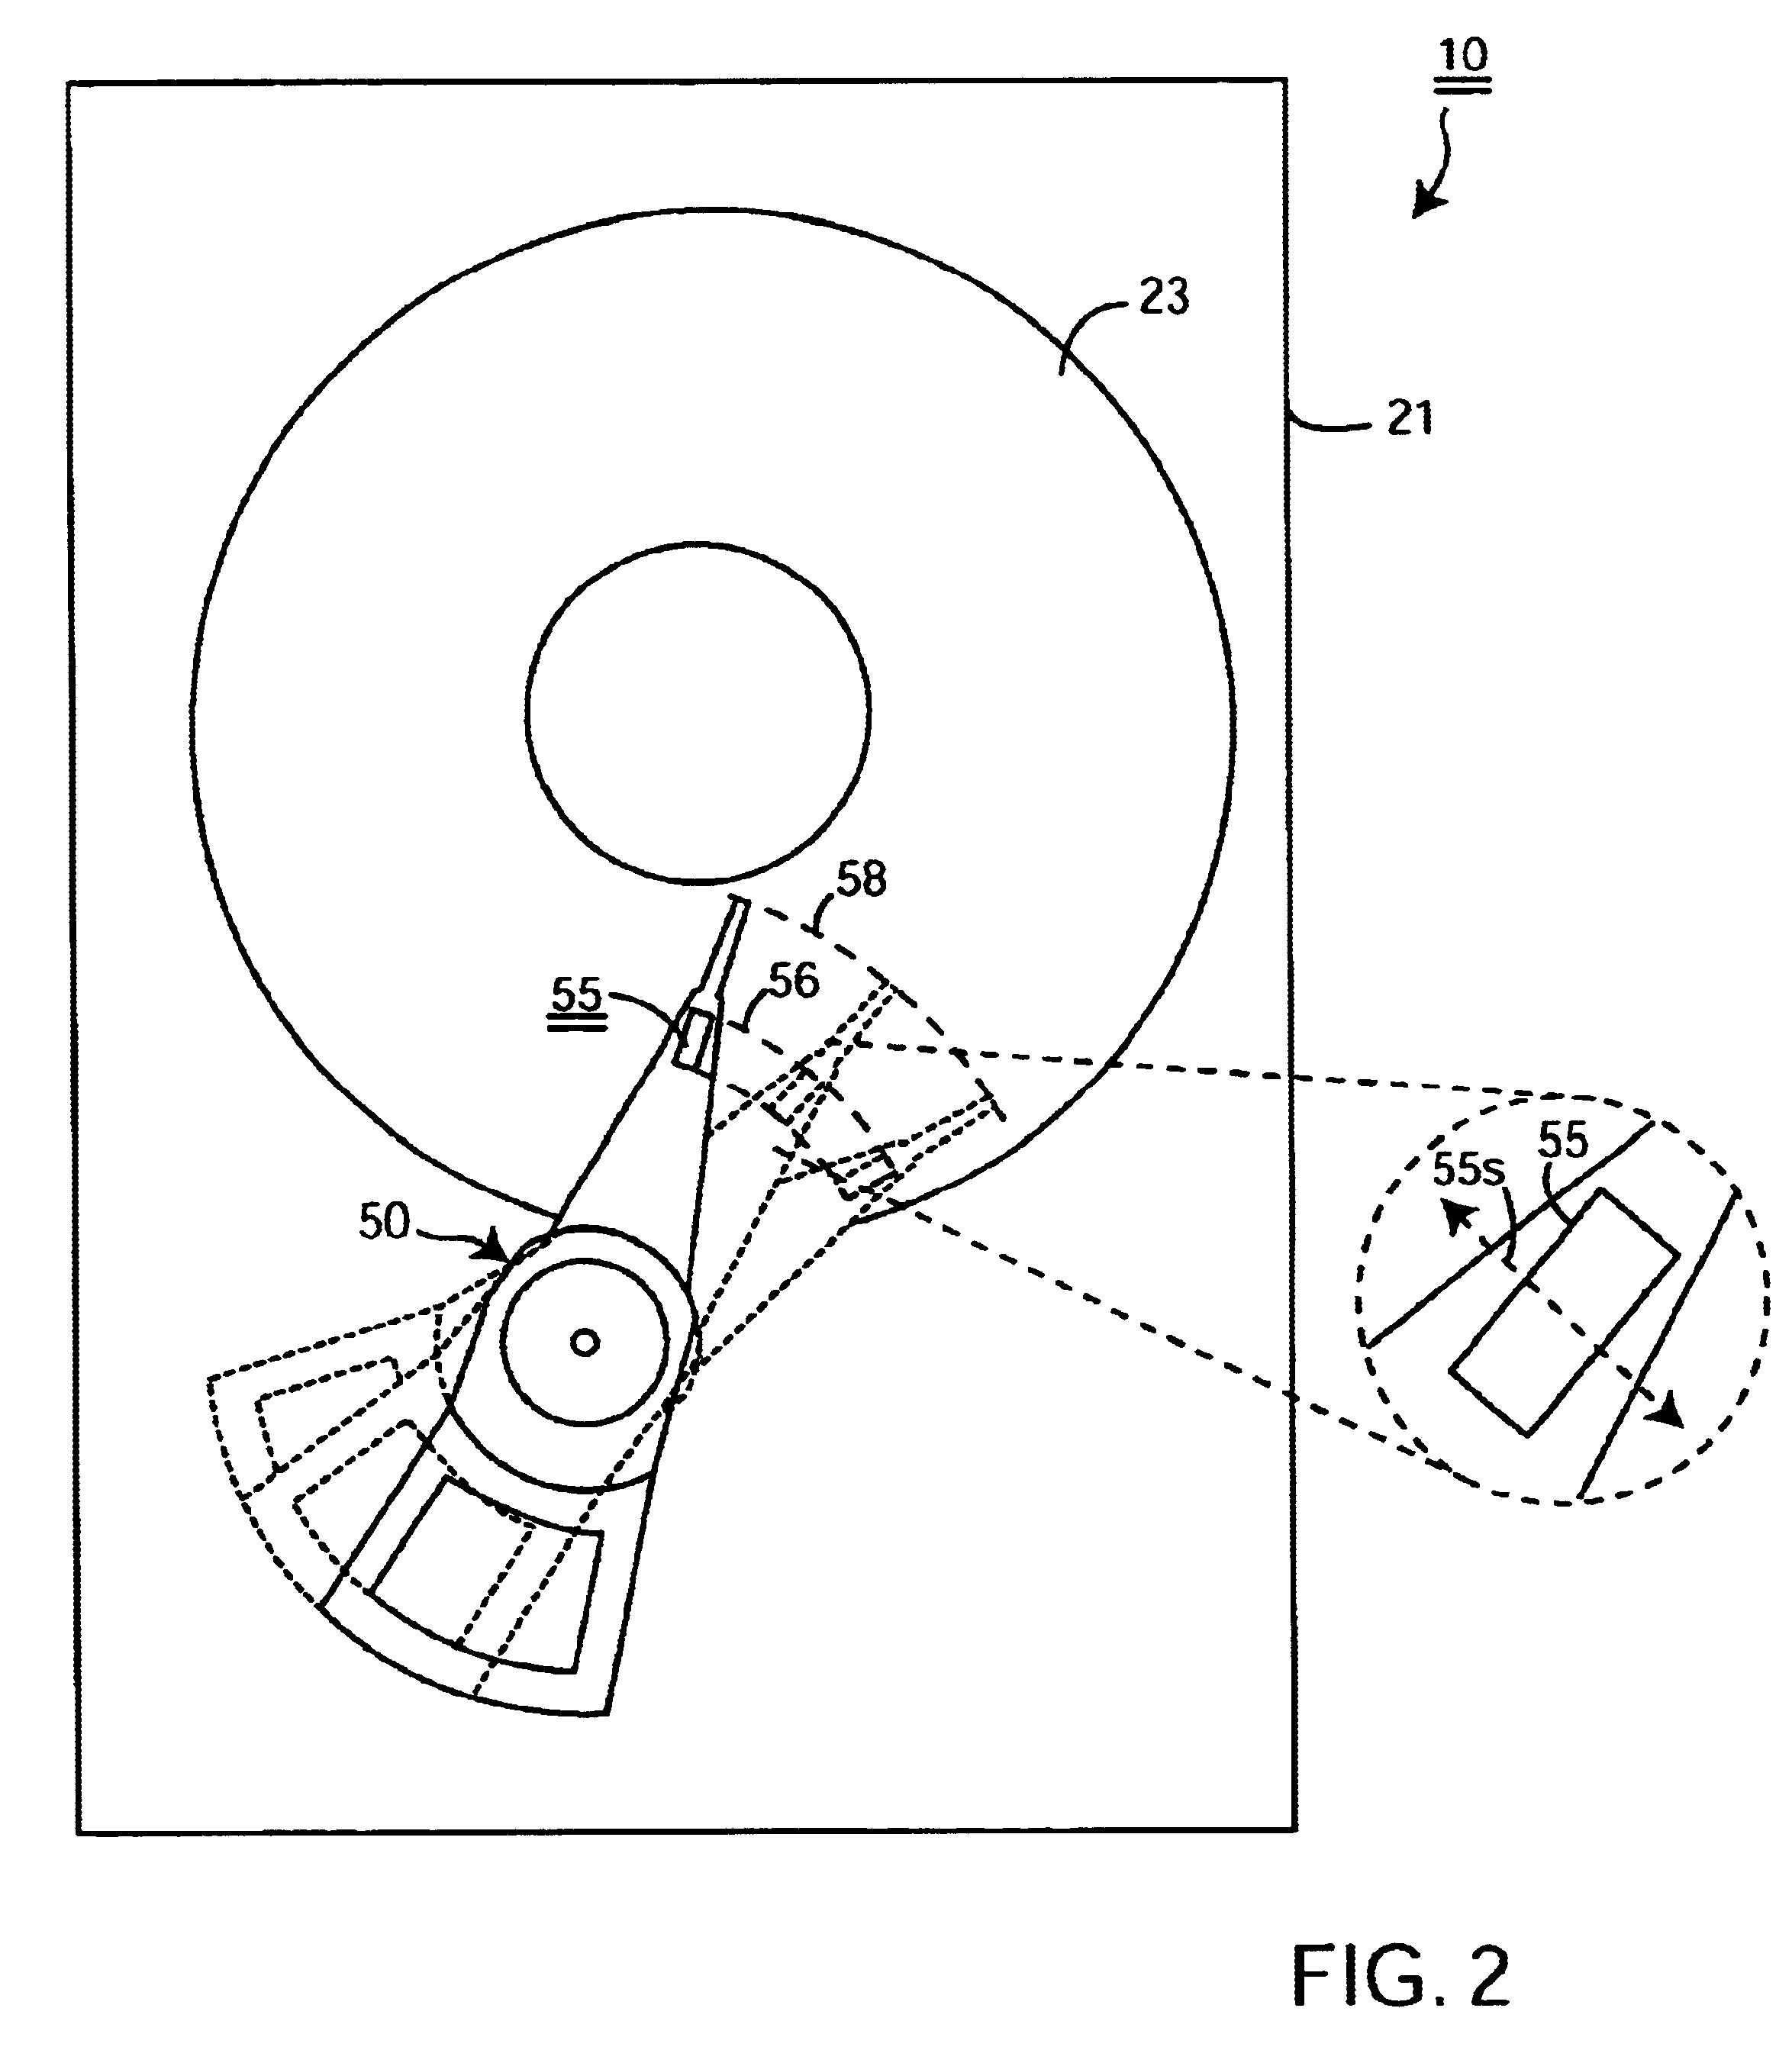 Disk drive having separate motion sensors for base and actuator